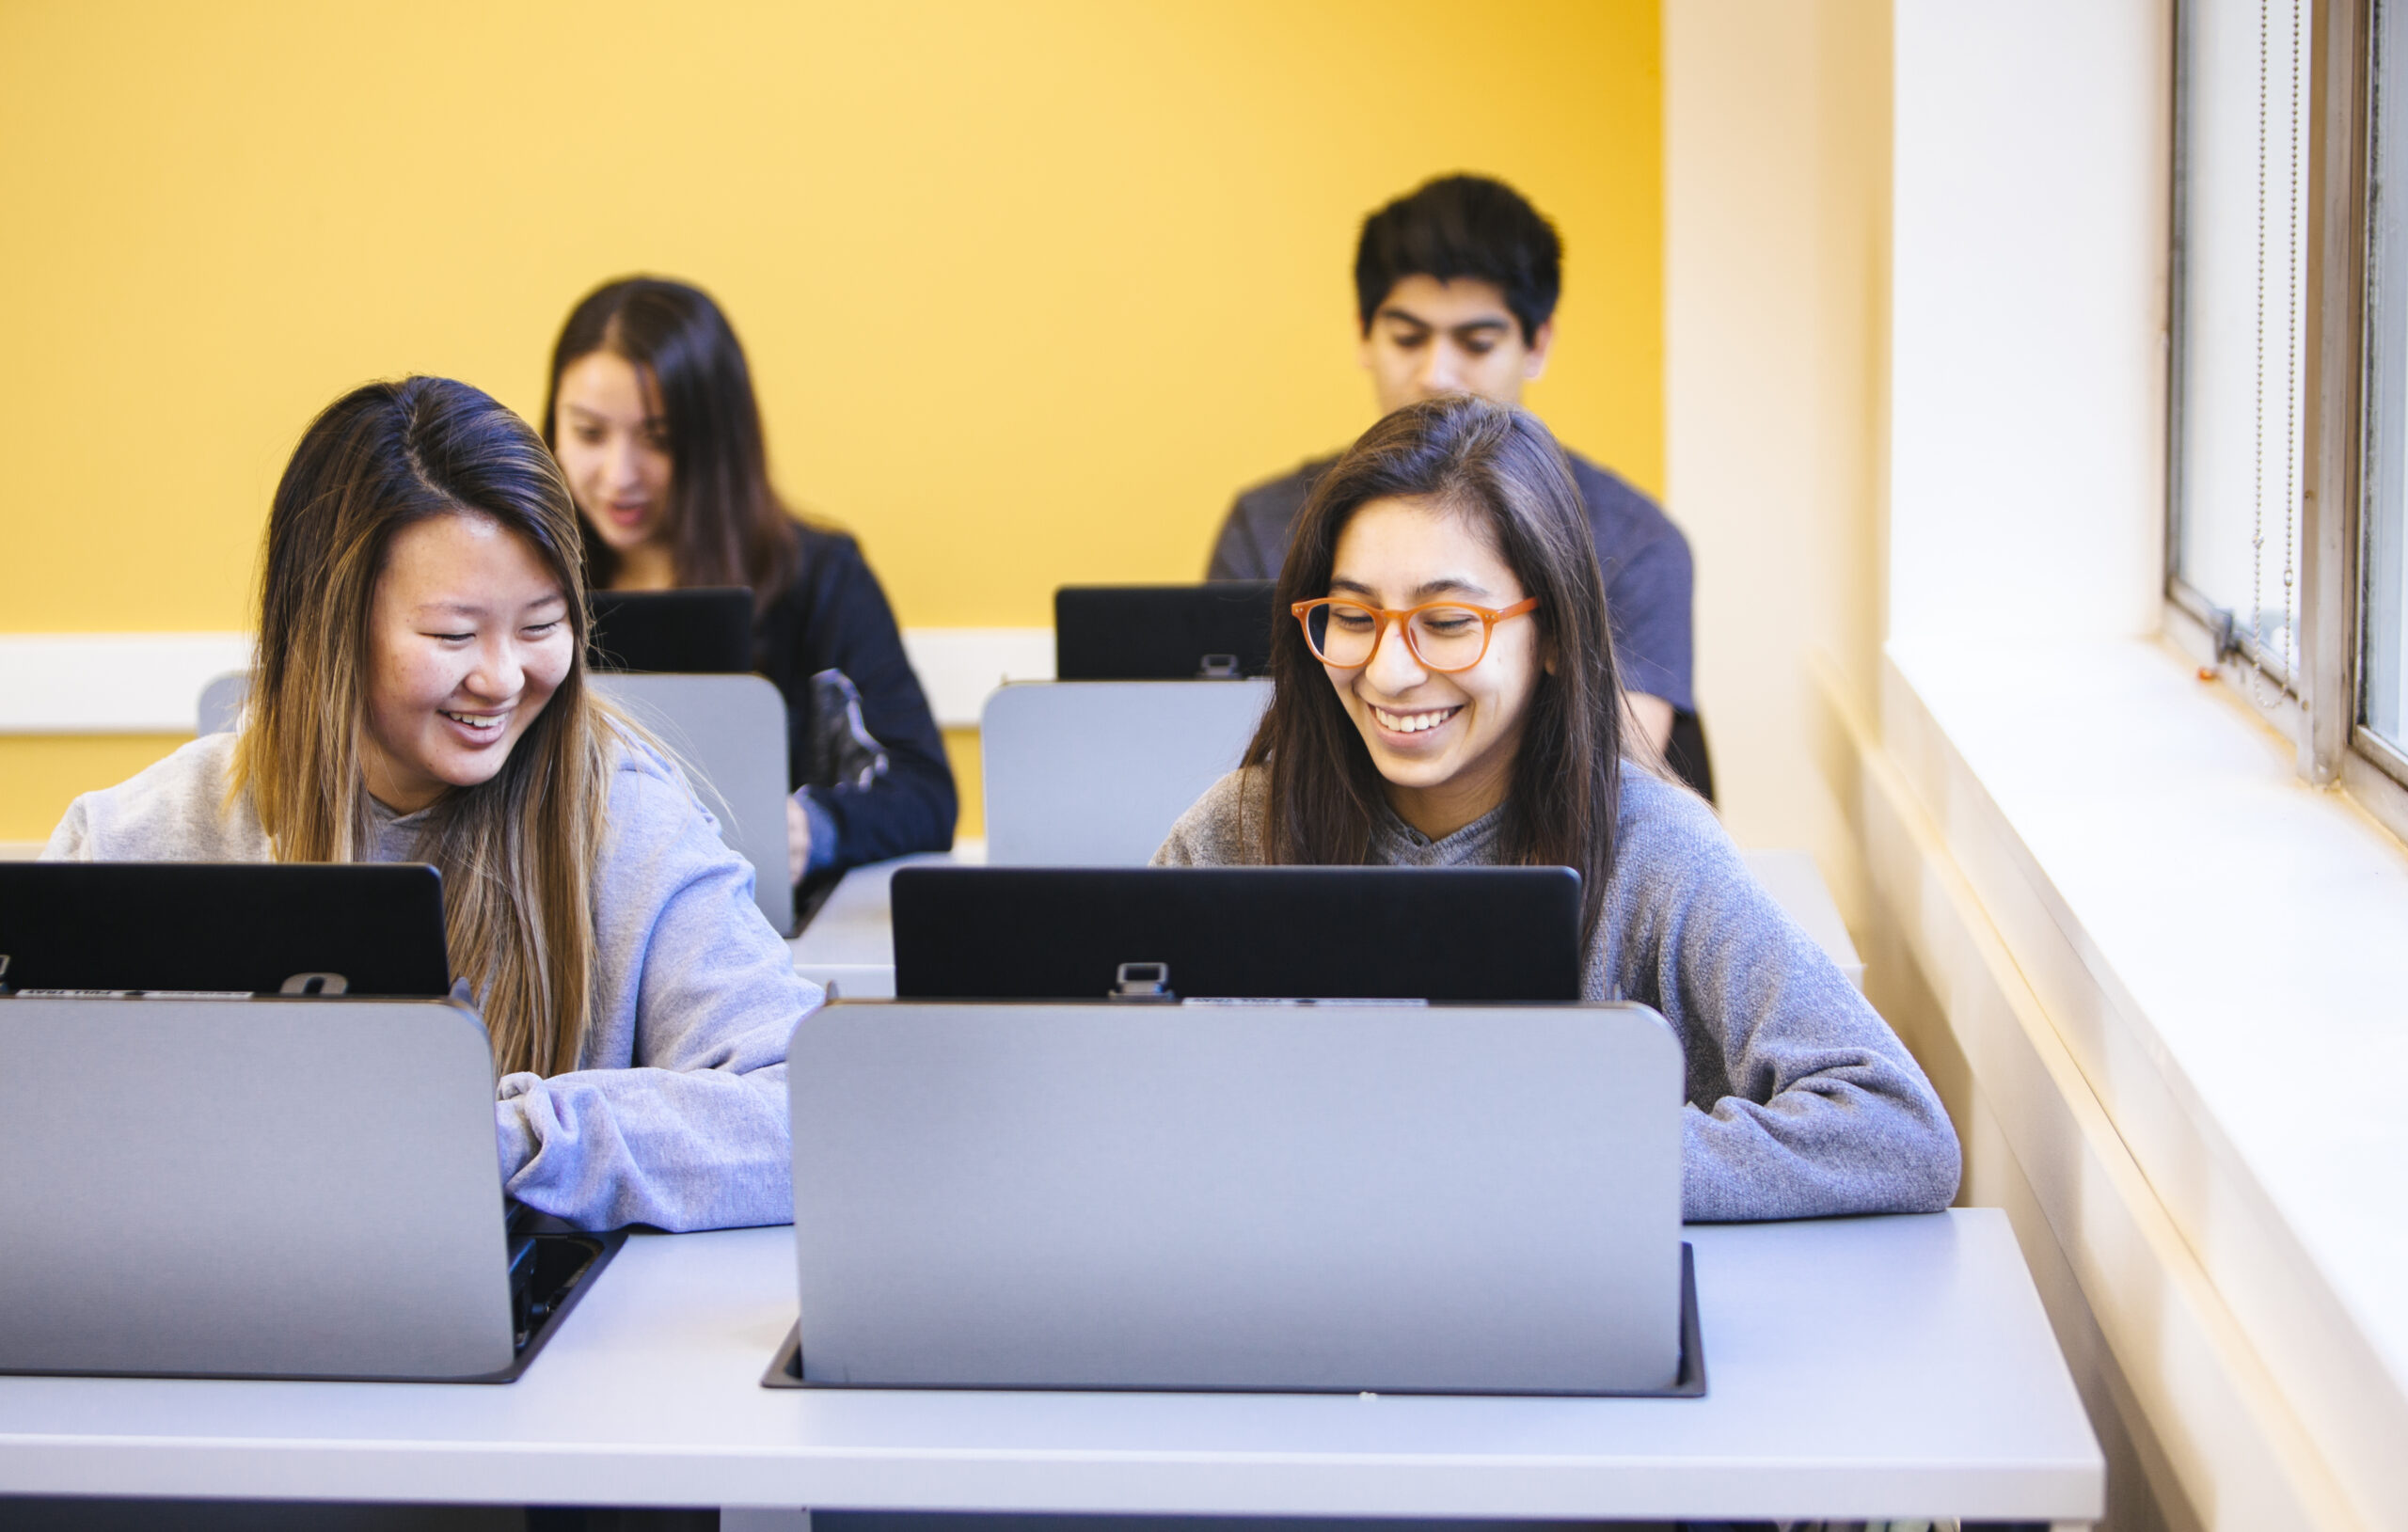 Students viewing something pleasant on their laptops